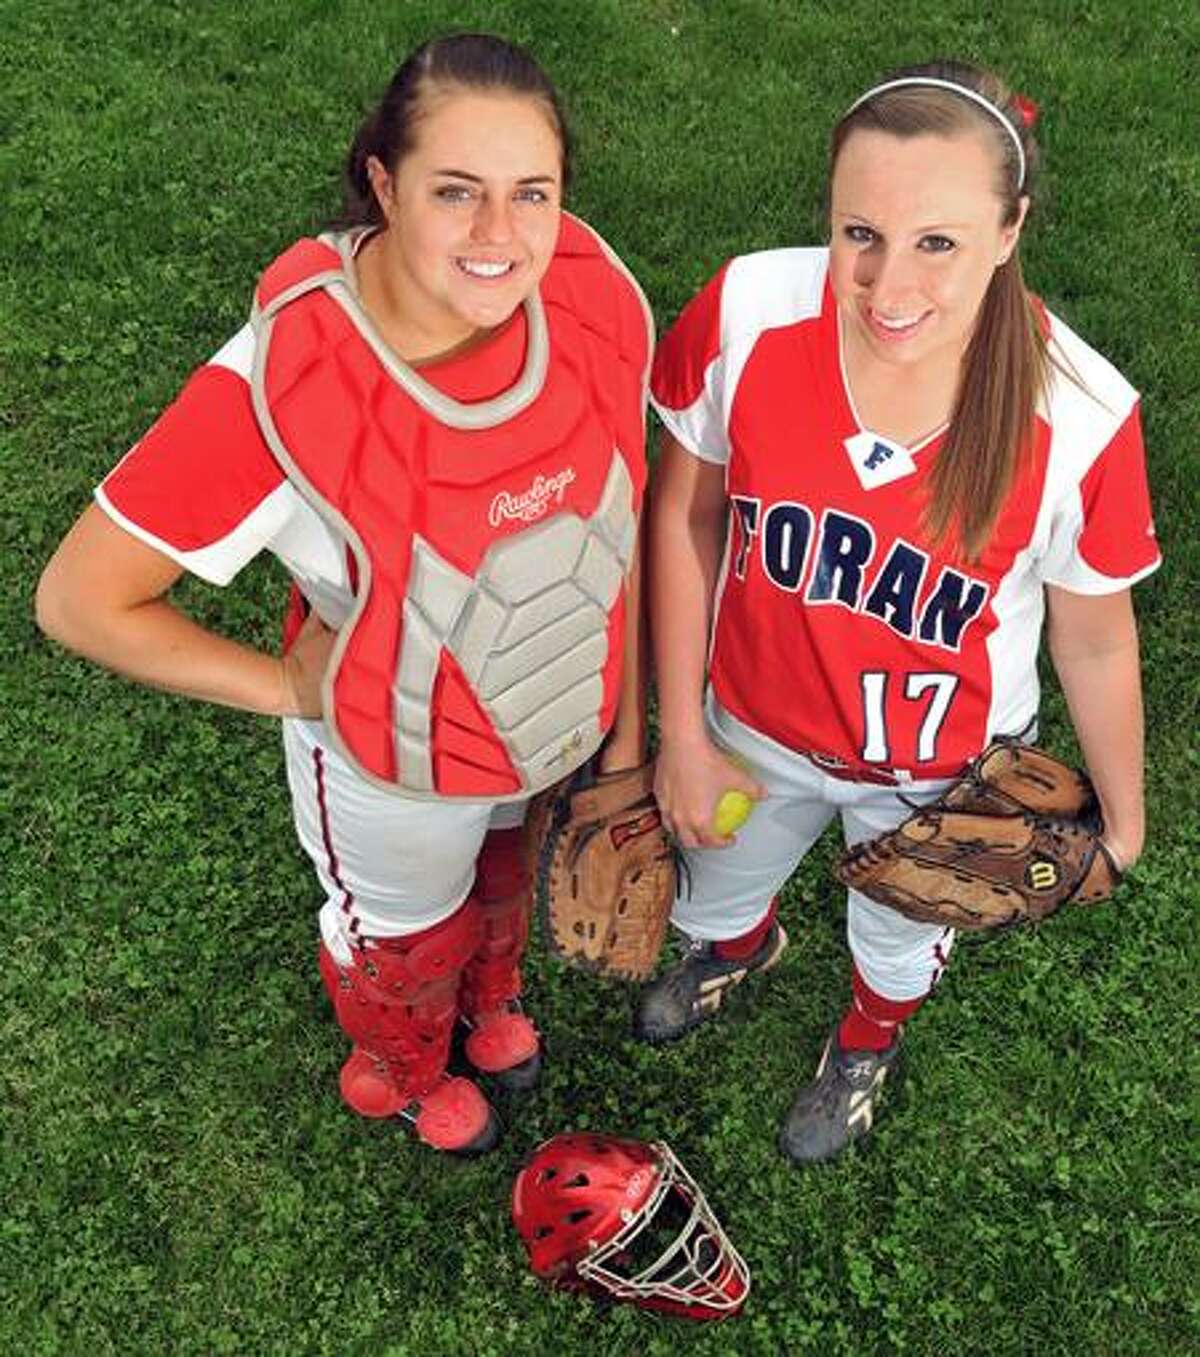 Milford--Foran battery of Rachel Booth and Taylor Harkness. Photo by Brad Horrigan/New Haven Register. 05.14.11.